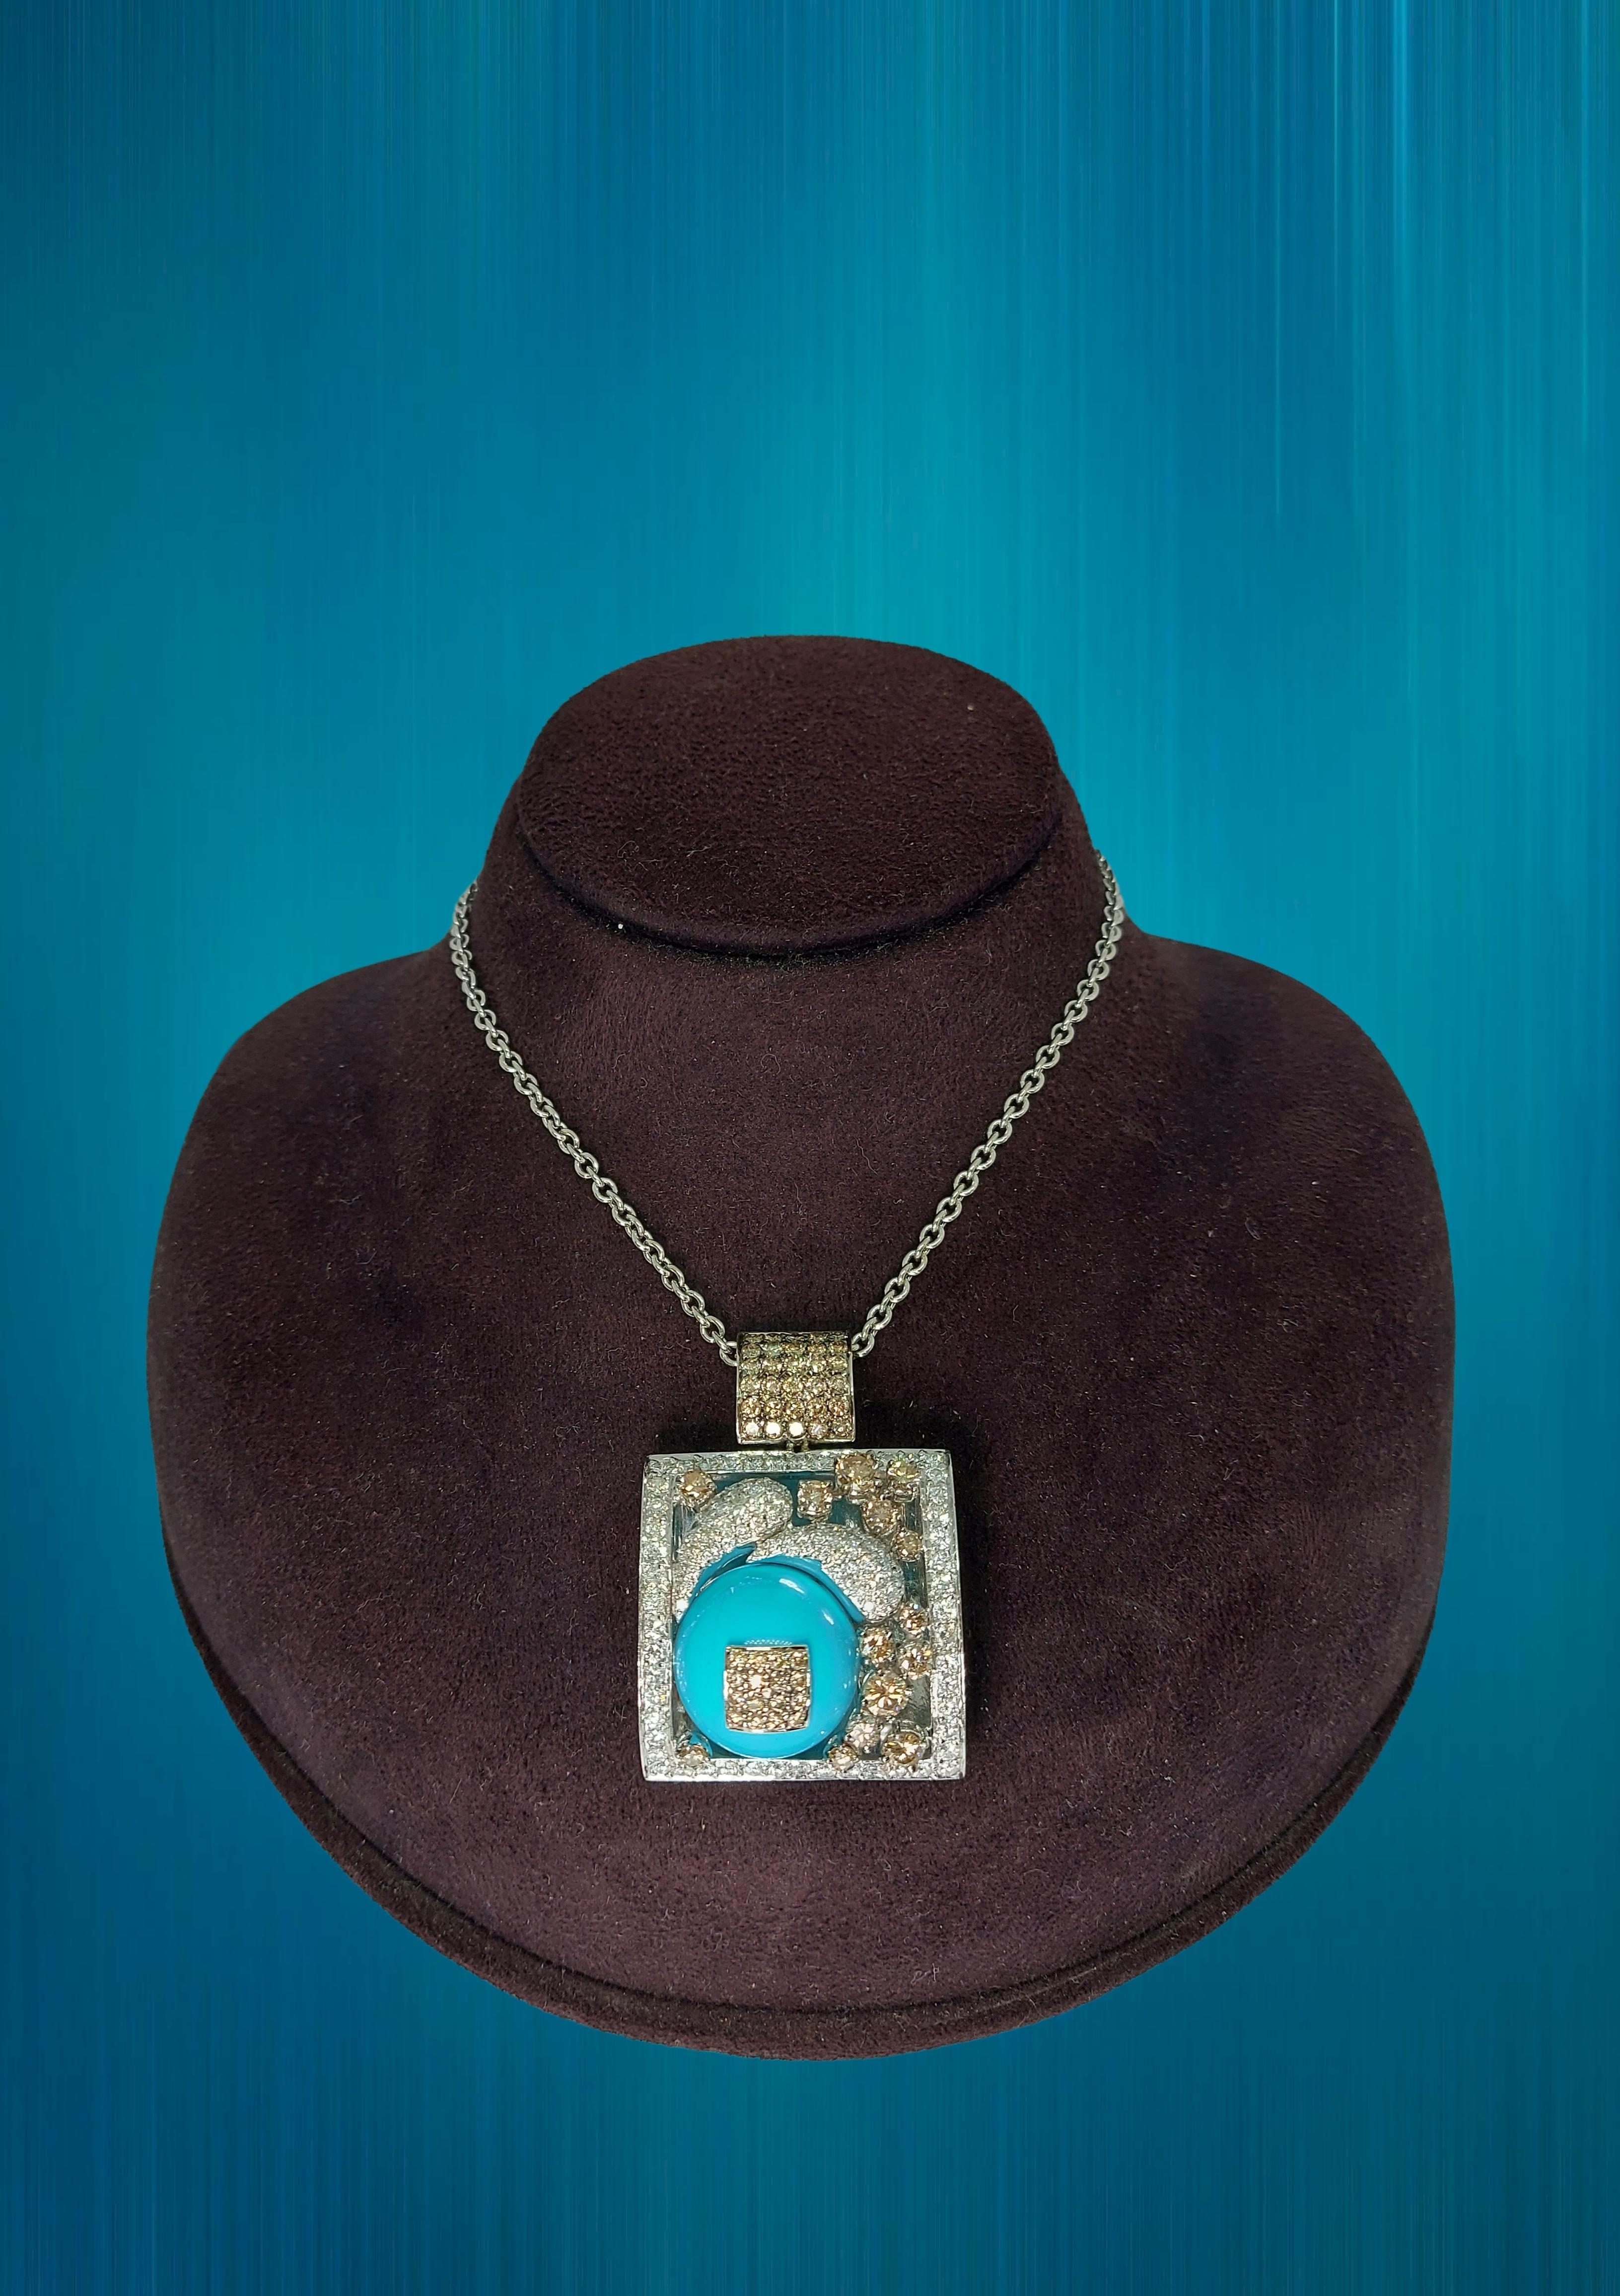 Stunning 18kt White Gold Pendant / Necklace with Turquoise and Diamonds 12